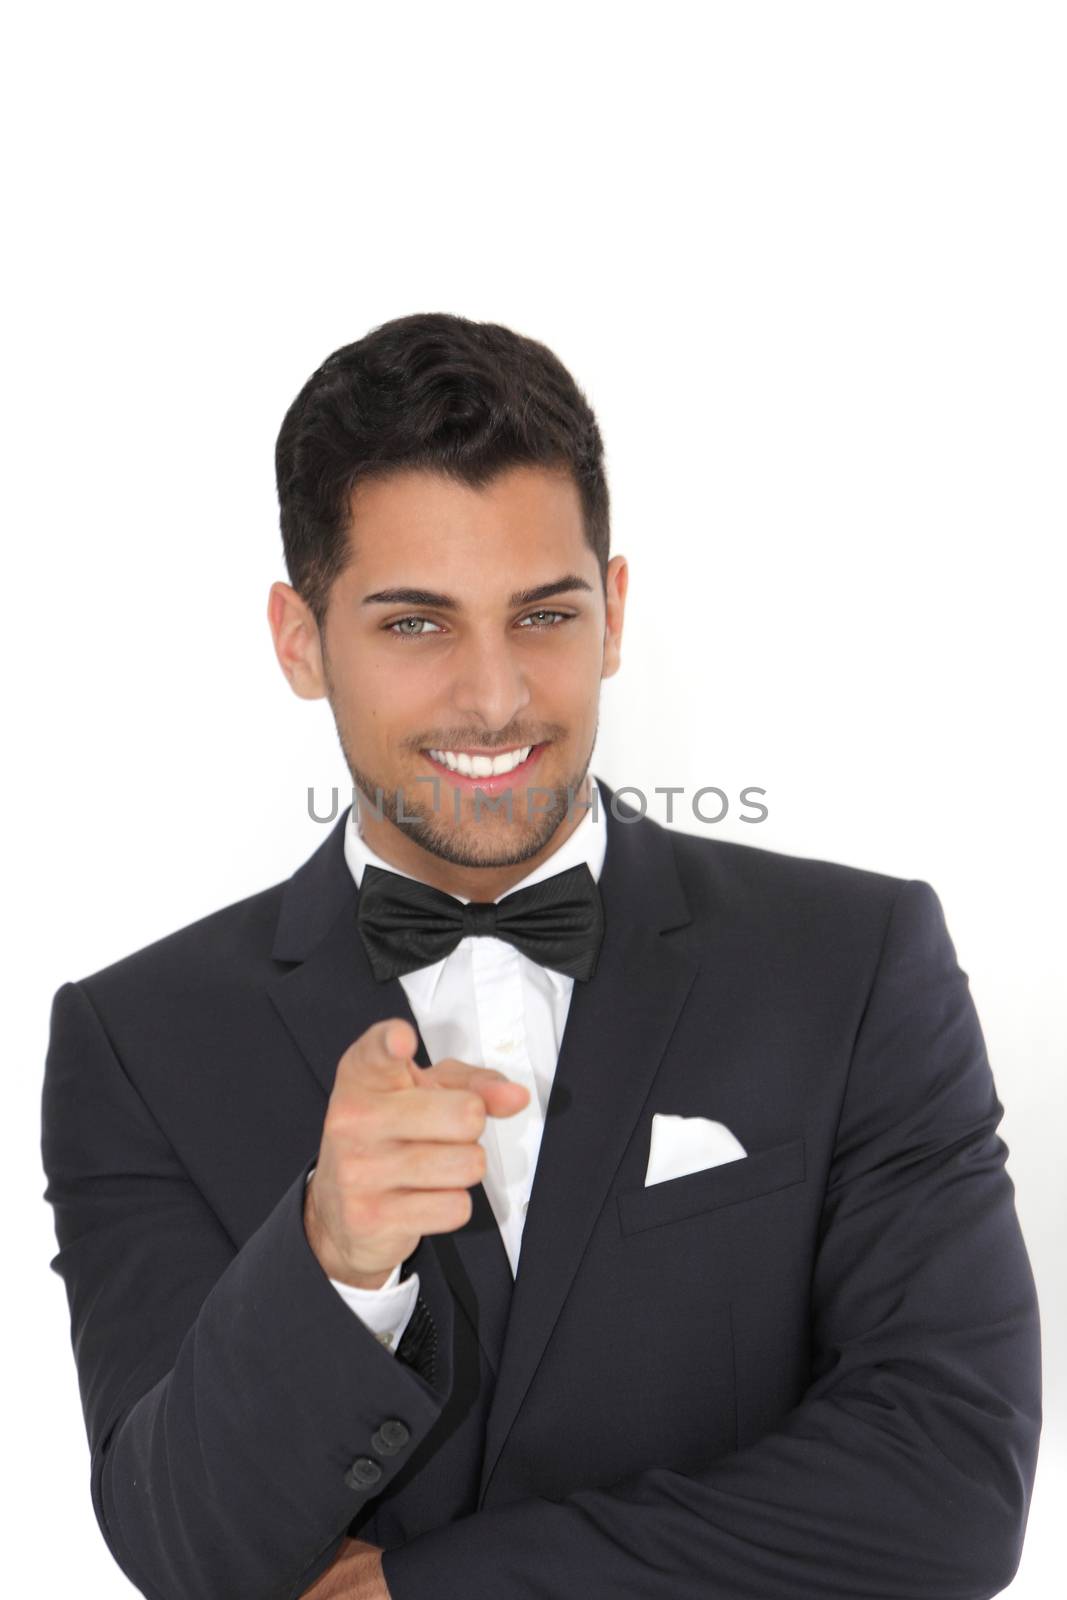 Handsome man in a tuxedo pointing directly at the camera with a friendly smile, isolated on white